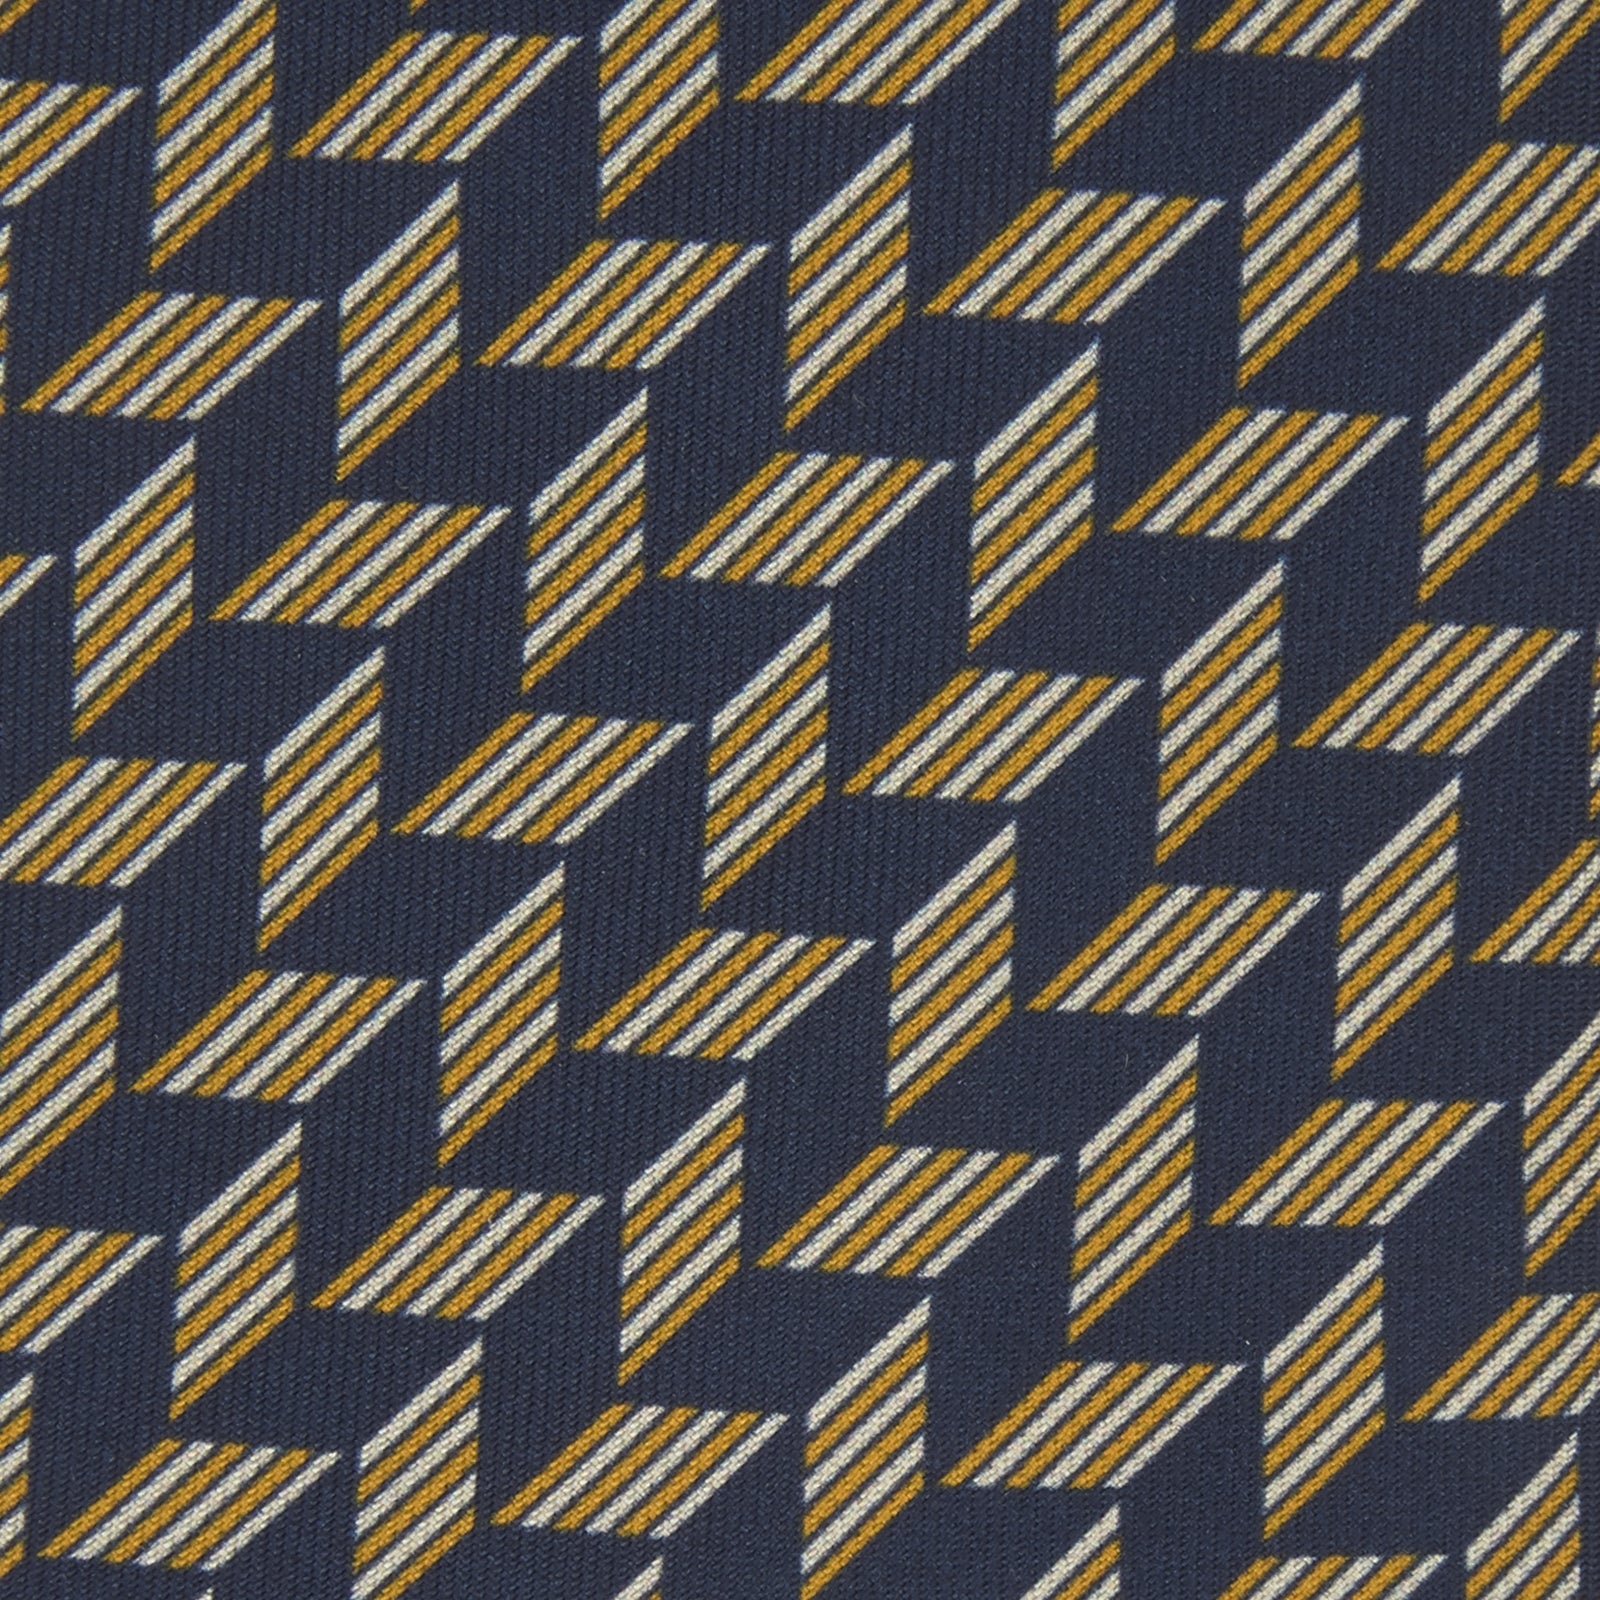 Blue and Gold Arrow Printed Silk Tie